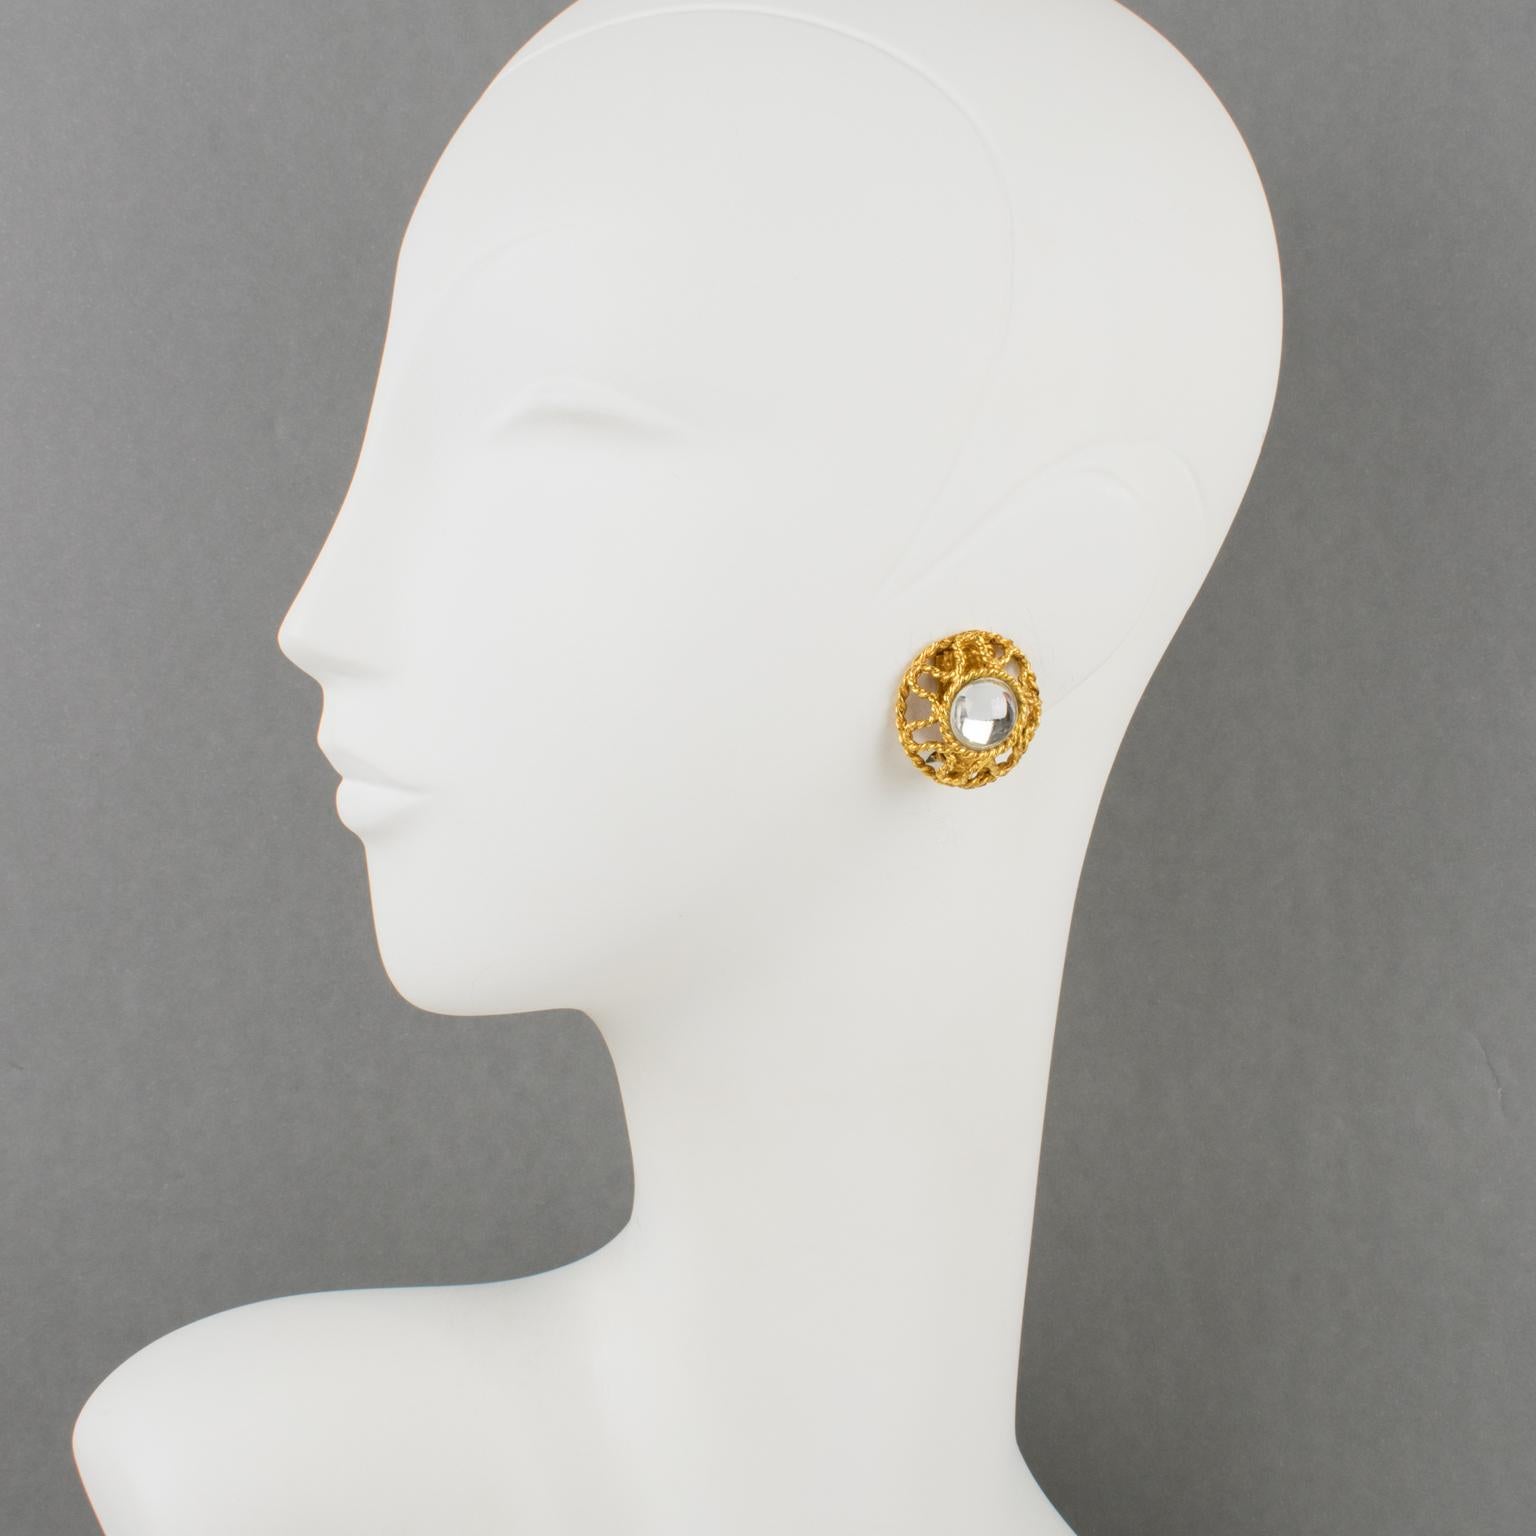 Lovely French designer Alexis Lahellec Paris signed clip-on earrings. They feature a rounded dimensional shape with gilt metal rope all carved and see-thru, topped with silver poured glass cabochon with a mirror effect. Signed at the back: 